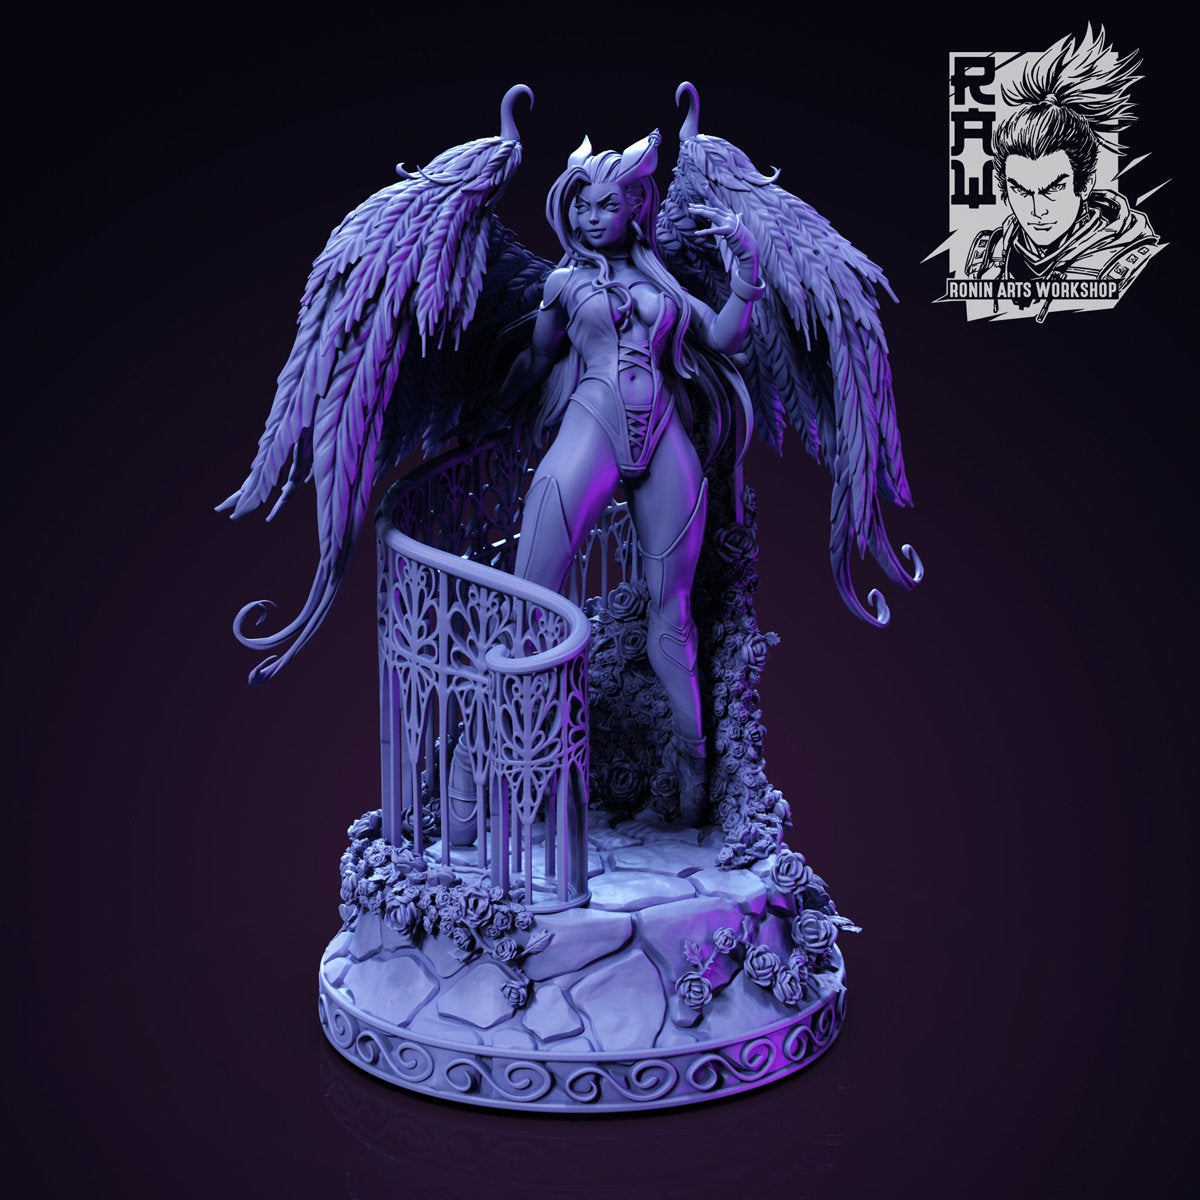 Sexy Succubus - Two Poses | Clothed or Nude | Resin 3D Printed Pinup | Ronin Arts Workshop